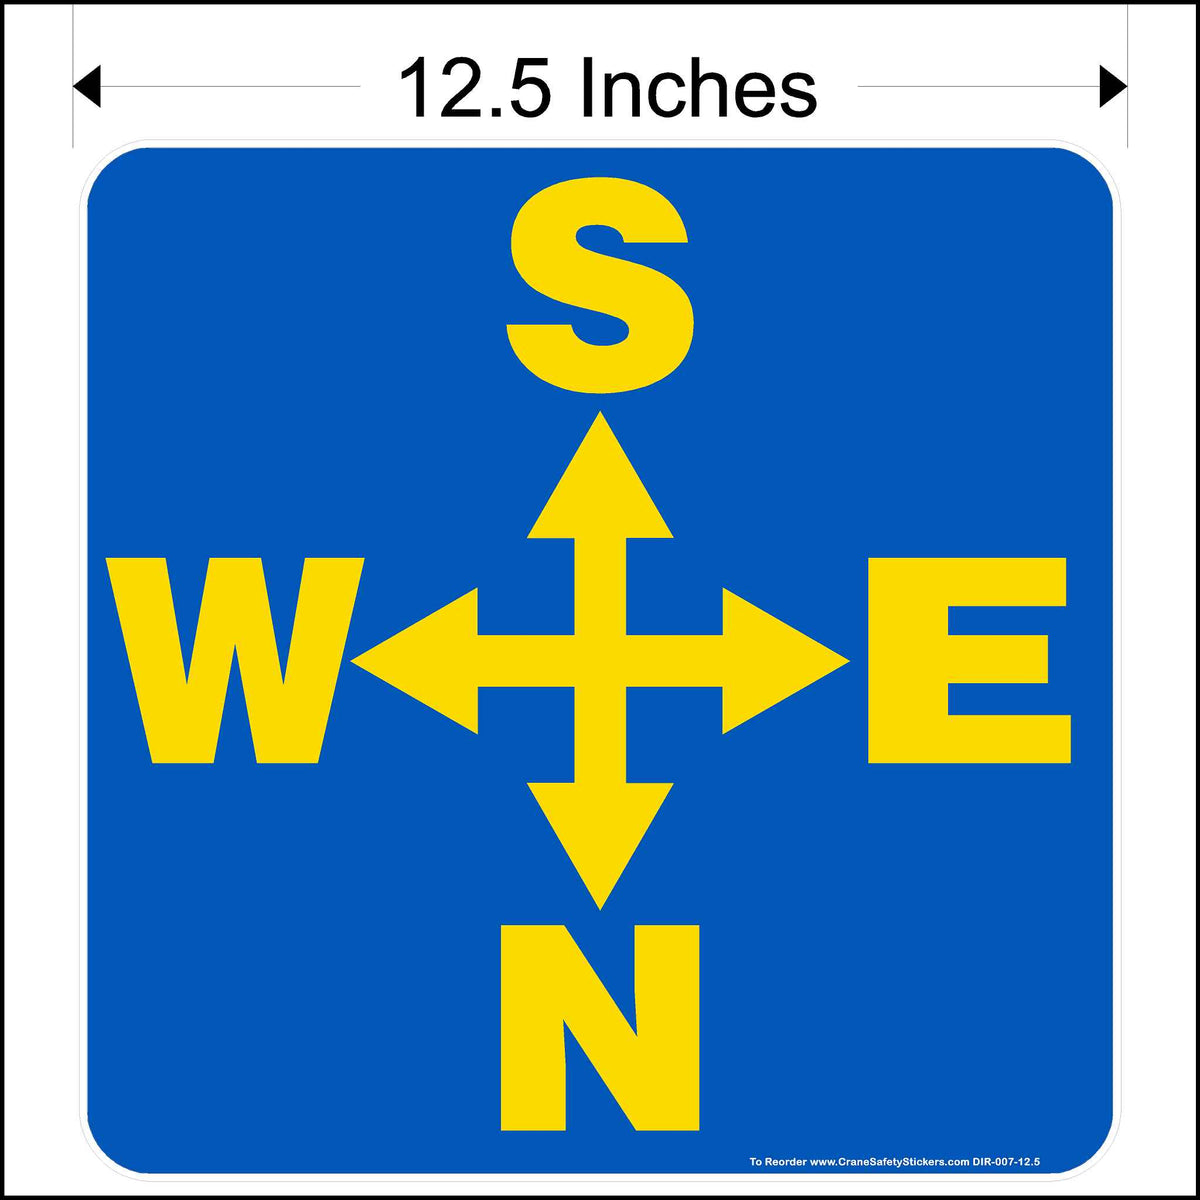 Twelve and a half inch overhead crane decal printed with yellow south, notrth, east, and west arrows on a blue background.